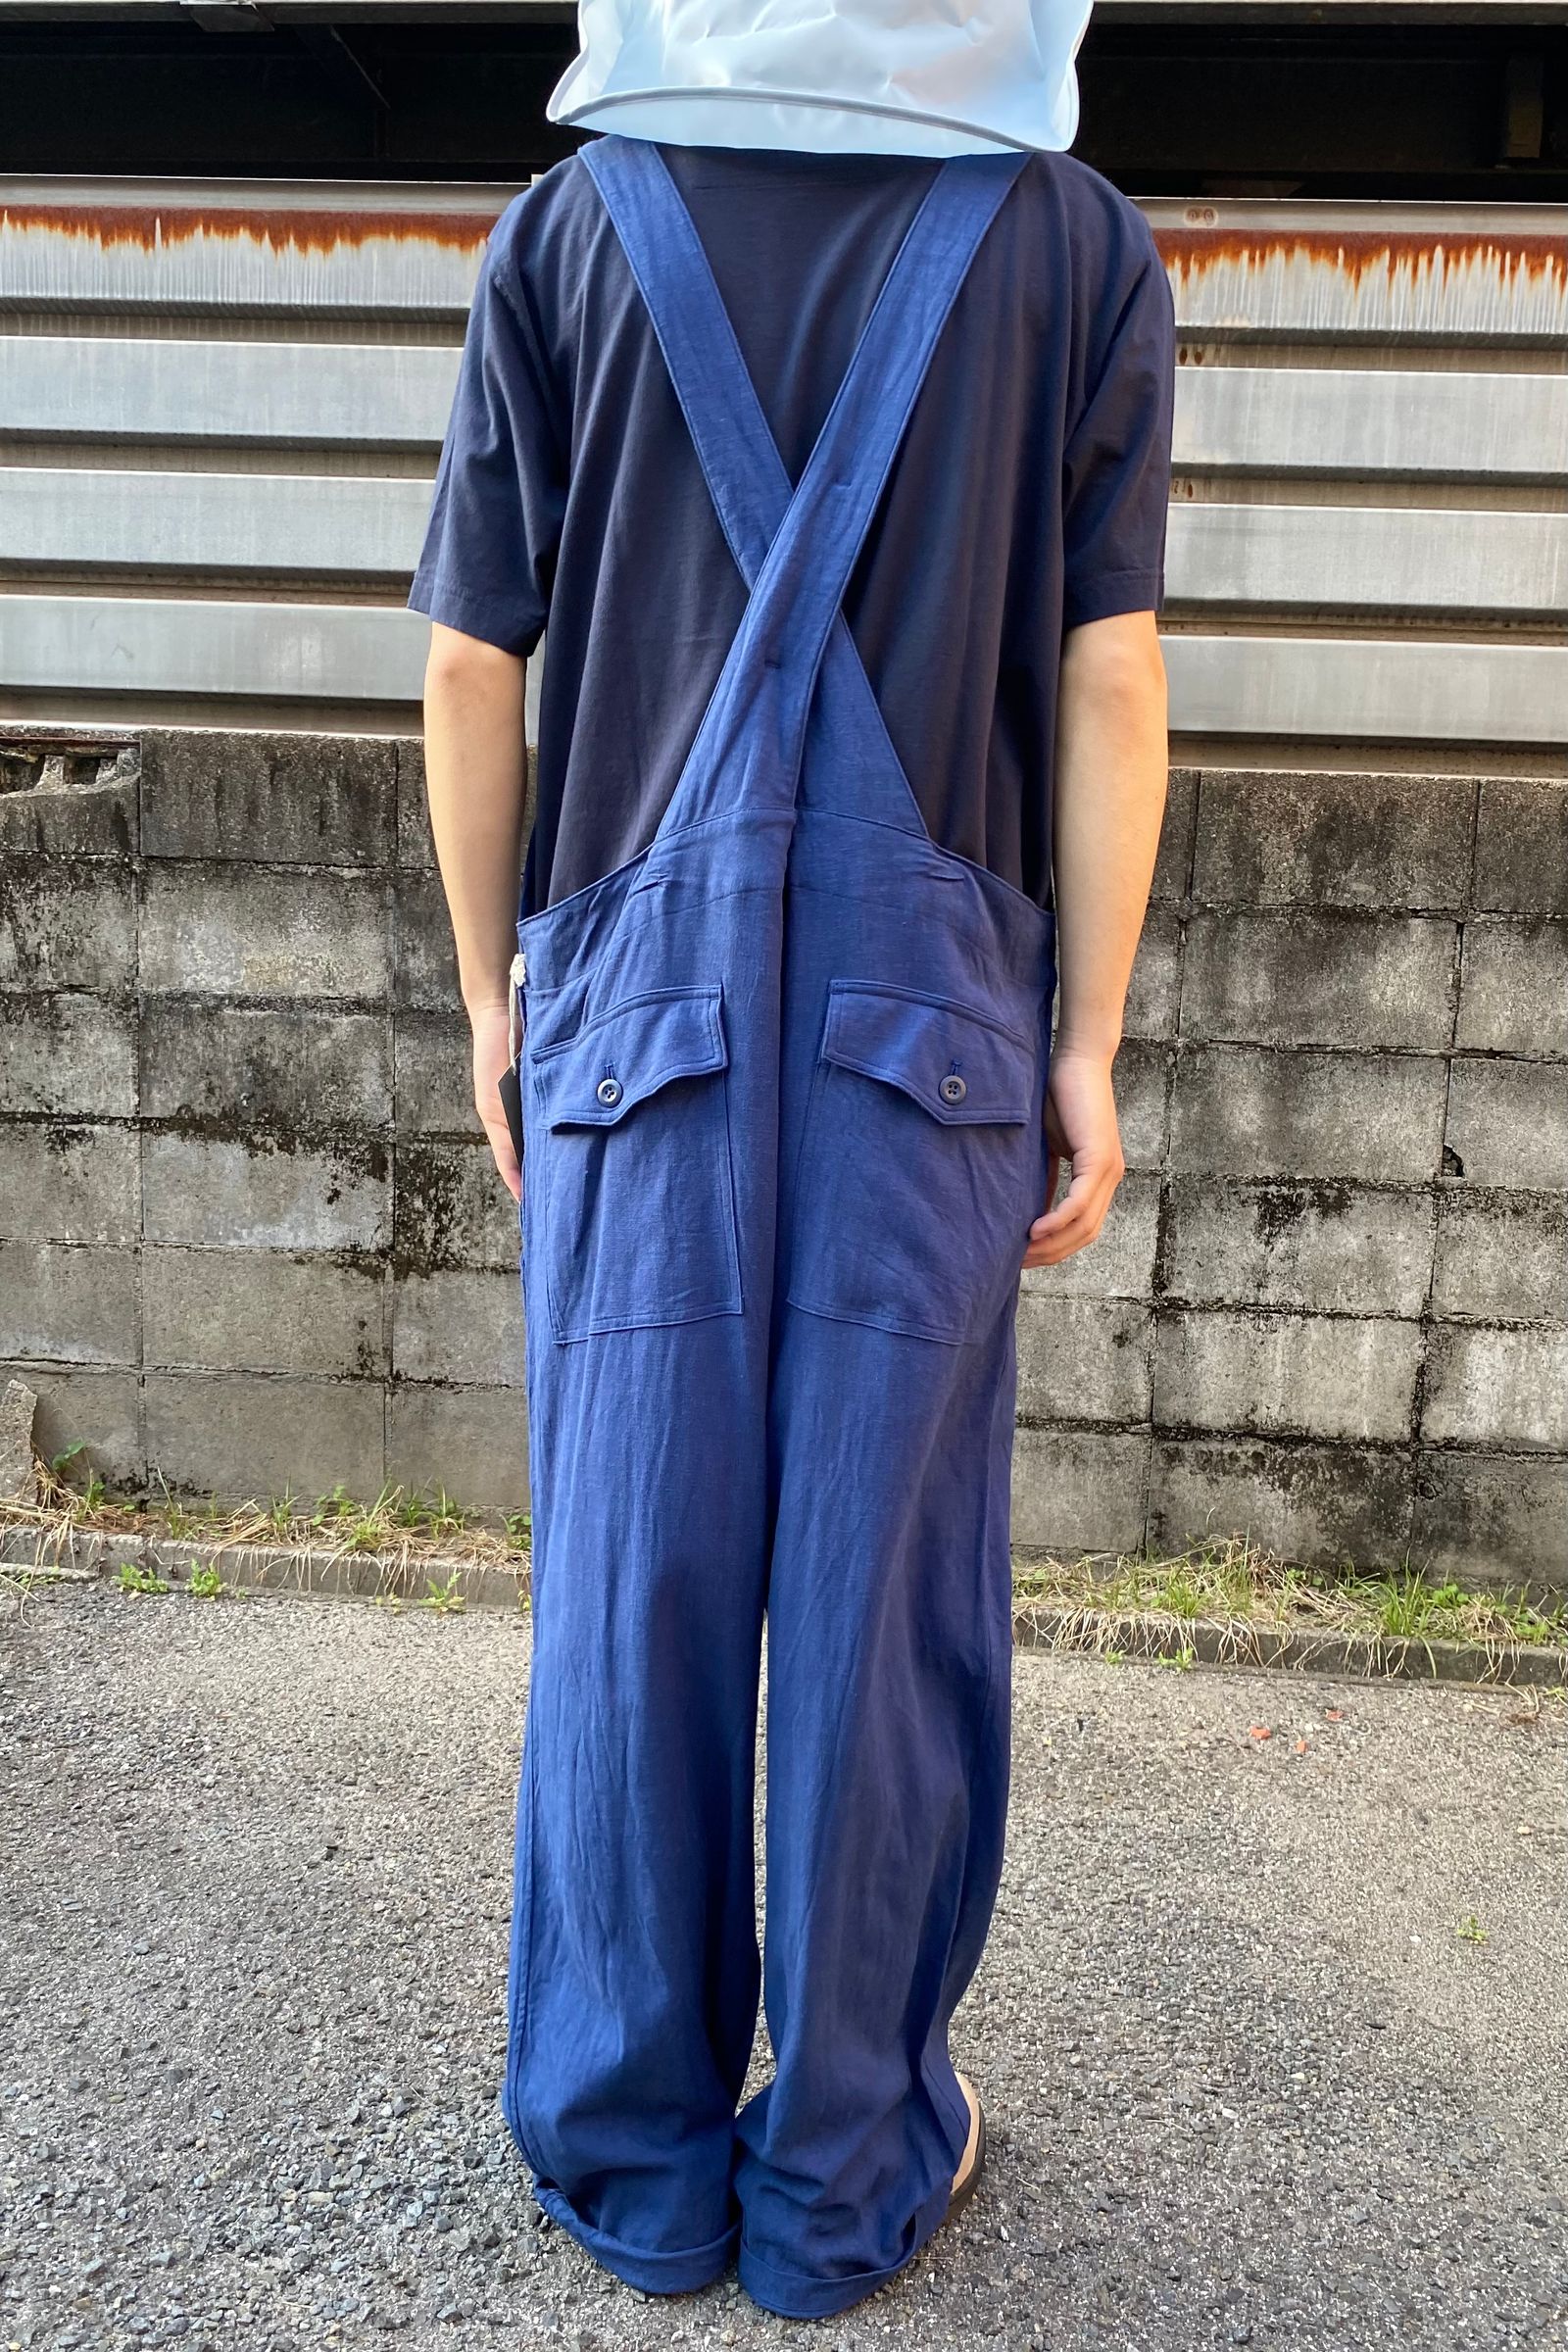 ts(s) - rayon*linen soft canvas cloth old style bib overalls